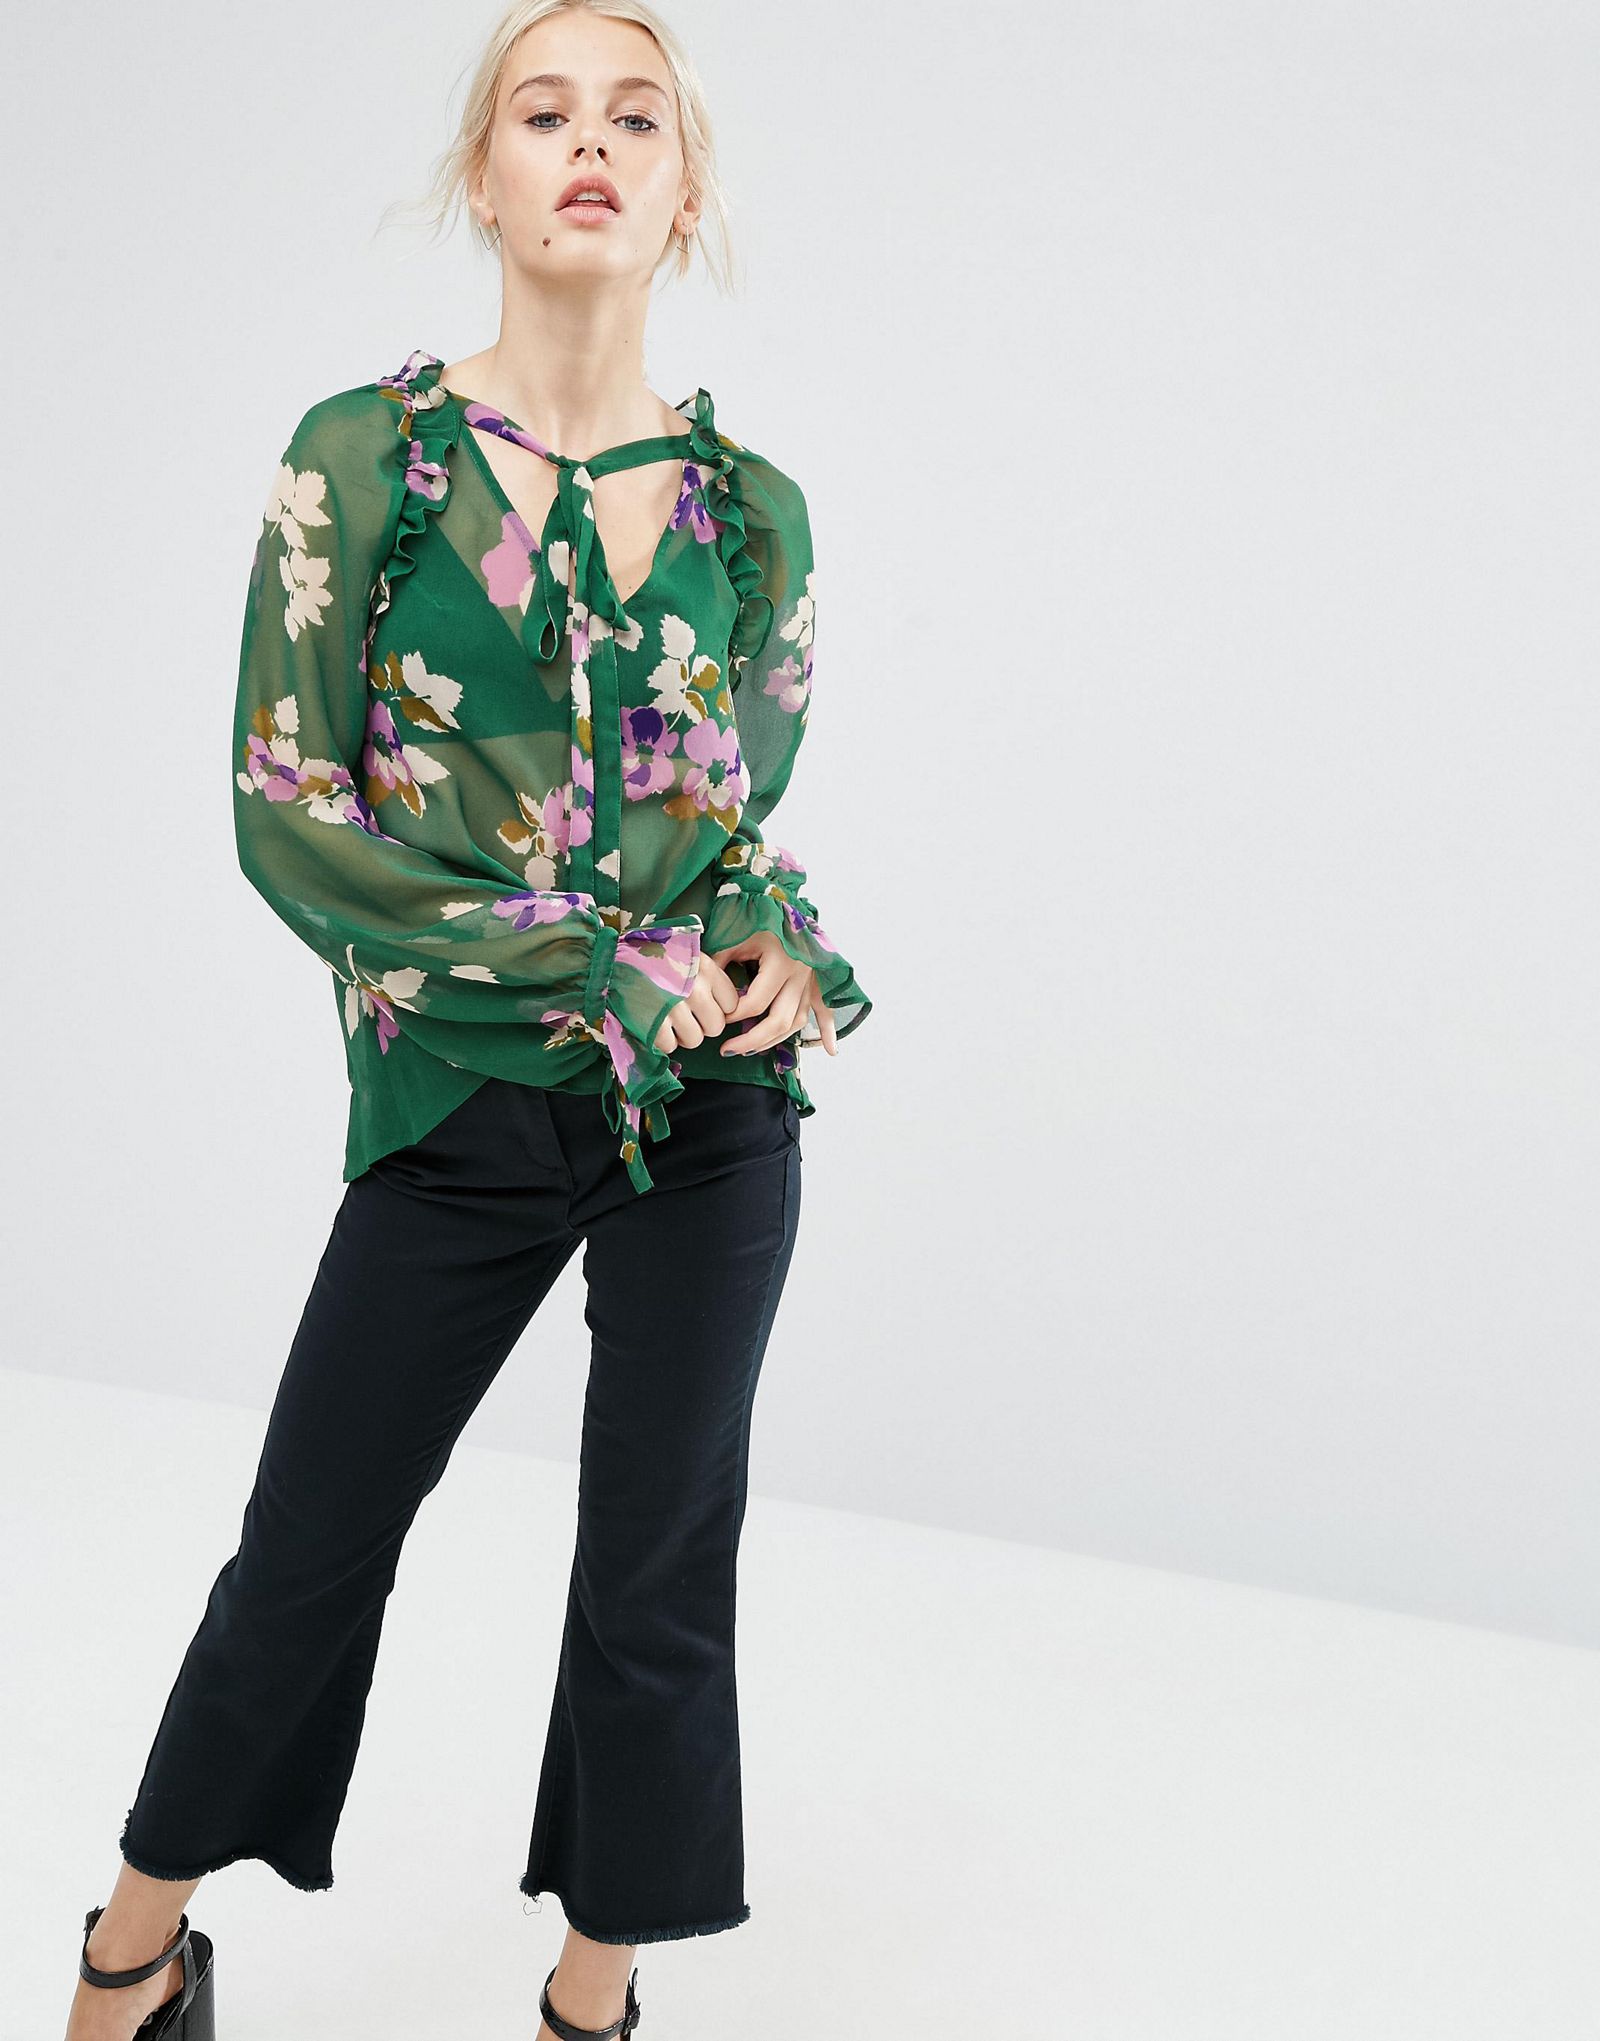 ASOS Blouse in Green Floral with Ruffle Sleeve Detail